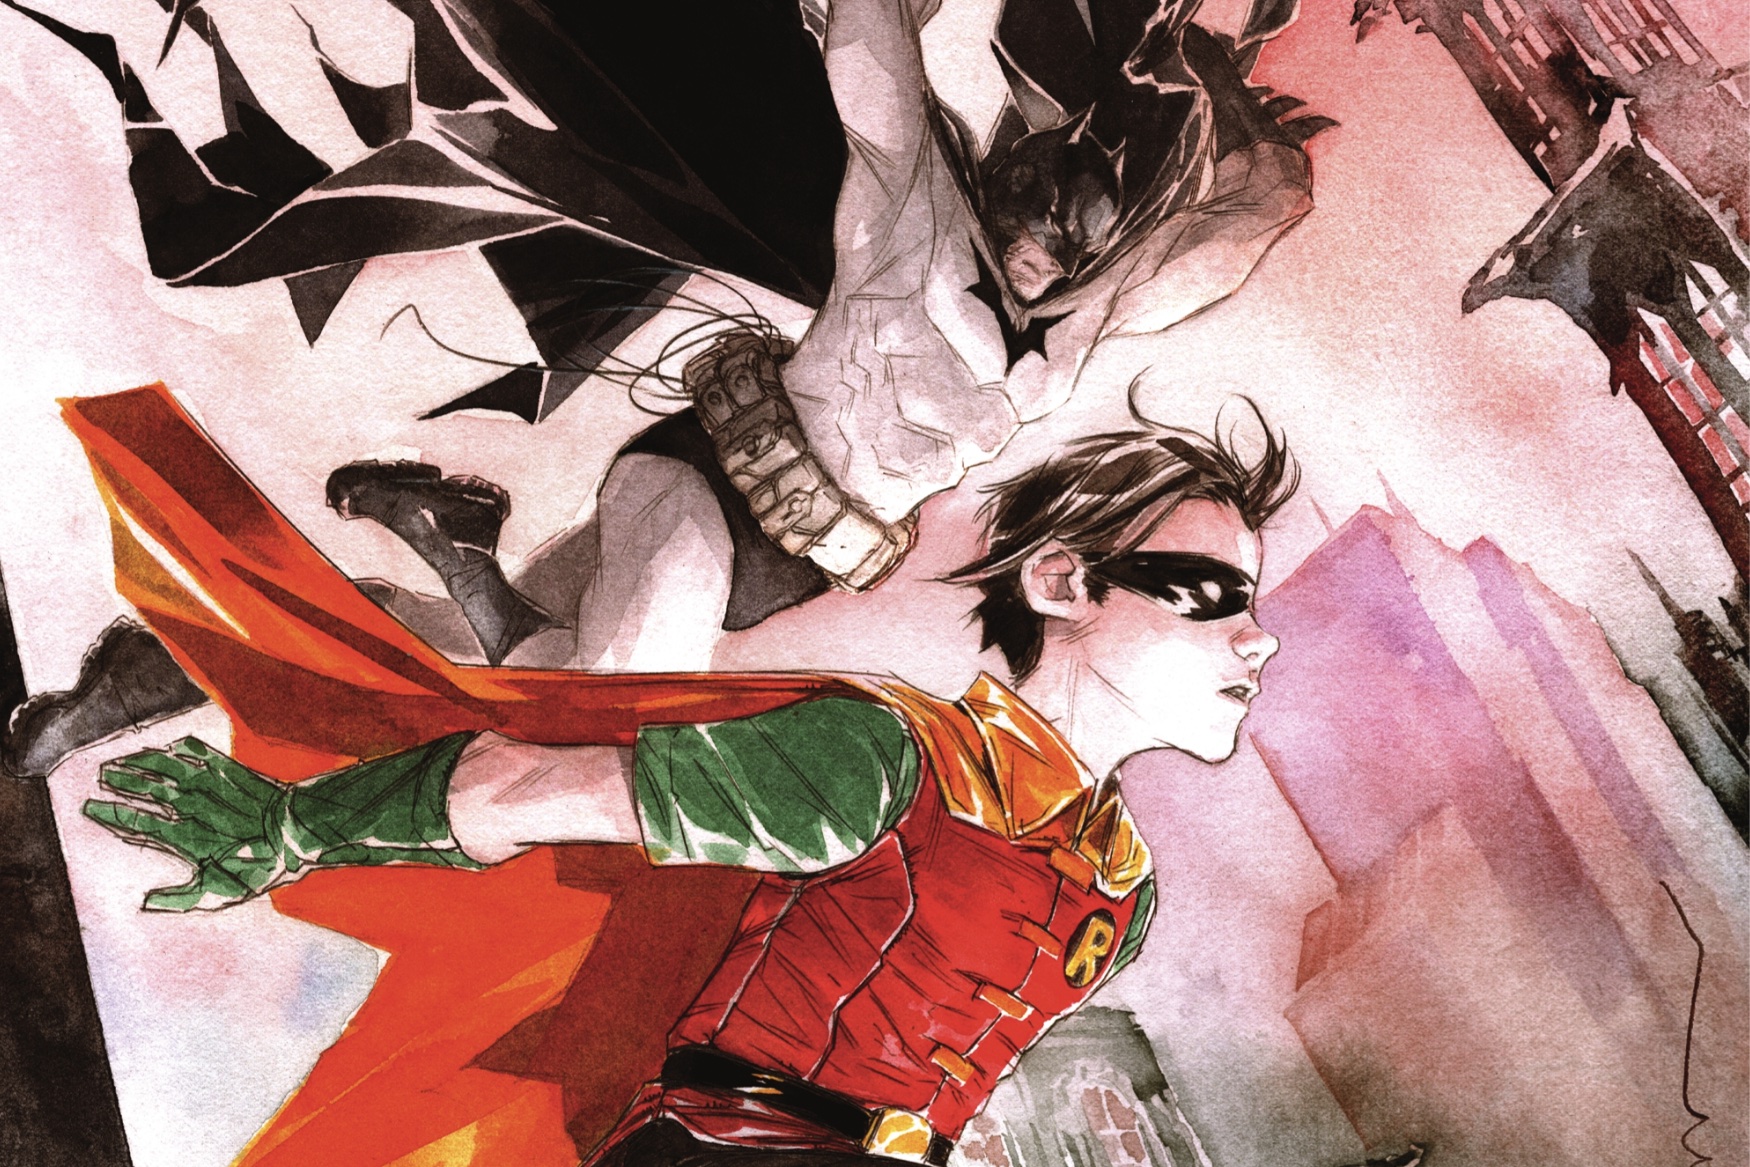 Batman and Robin swing through the skies of Gotham city, rendered in watercolors on the cover of Robin &amp; Batman #1 (2021).